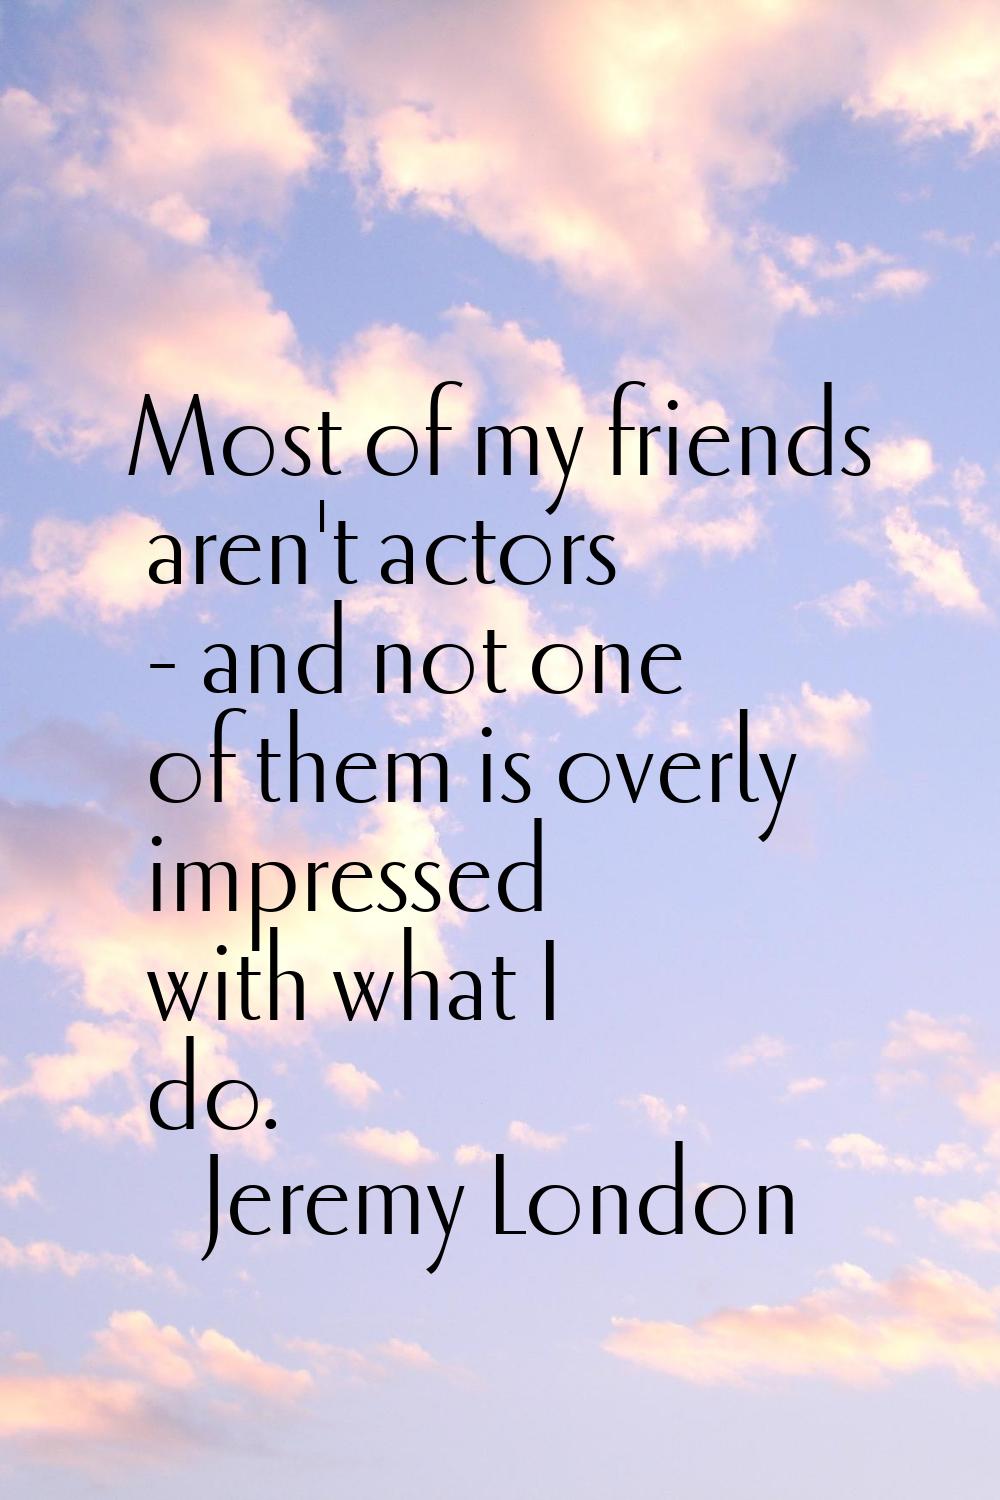 Most of my friends aren't actors - and not one of them is overly impressed with what I do.